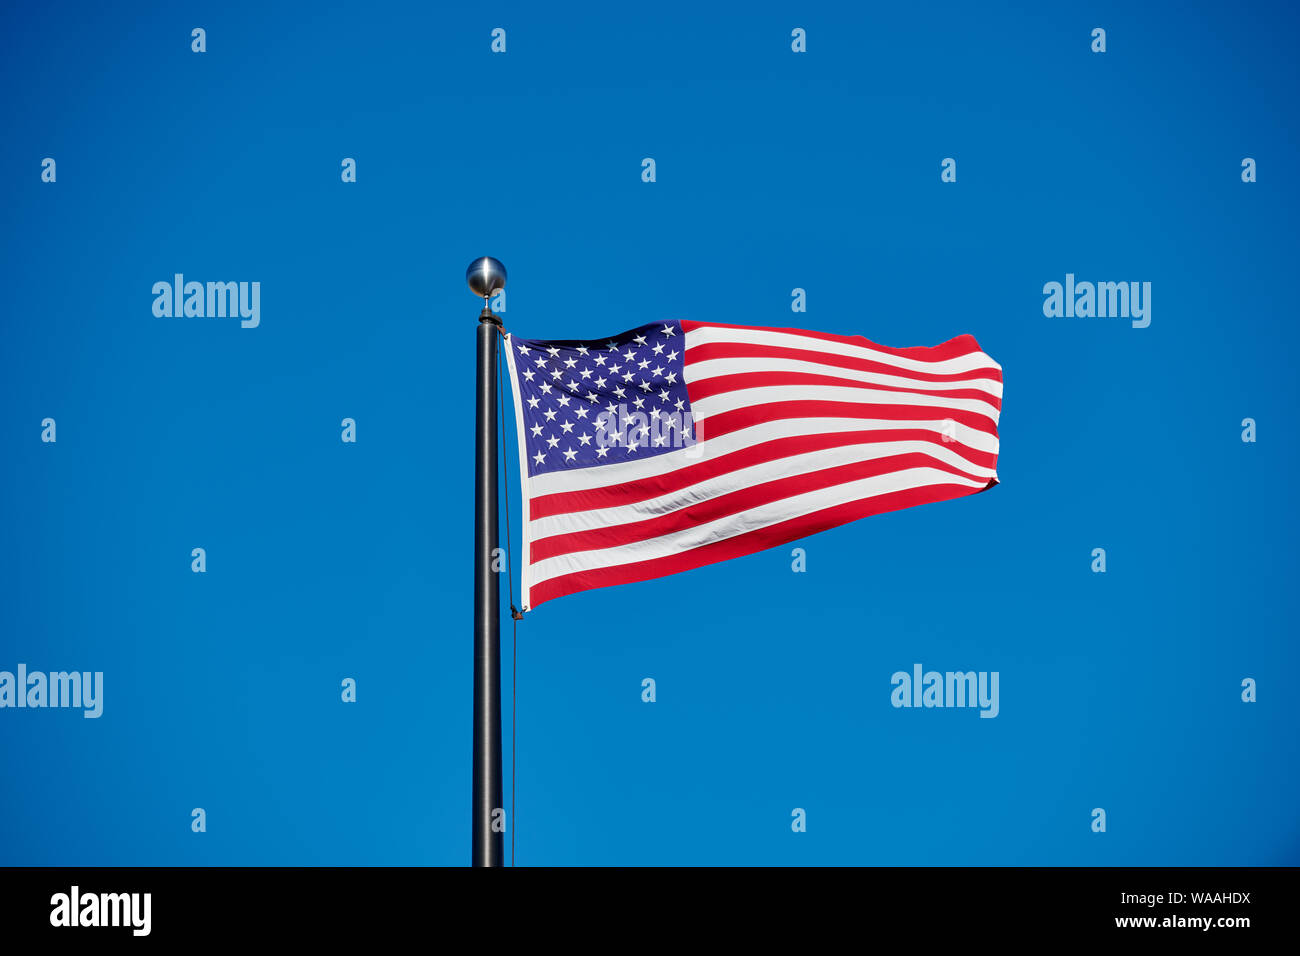 star spangled banner, national Flag of USA blowing in the wind, North America Stock Photo